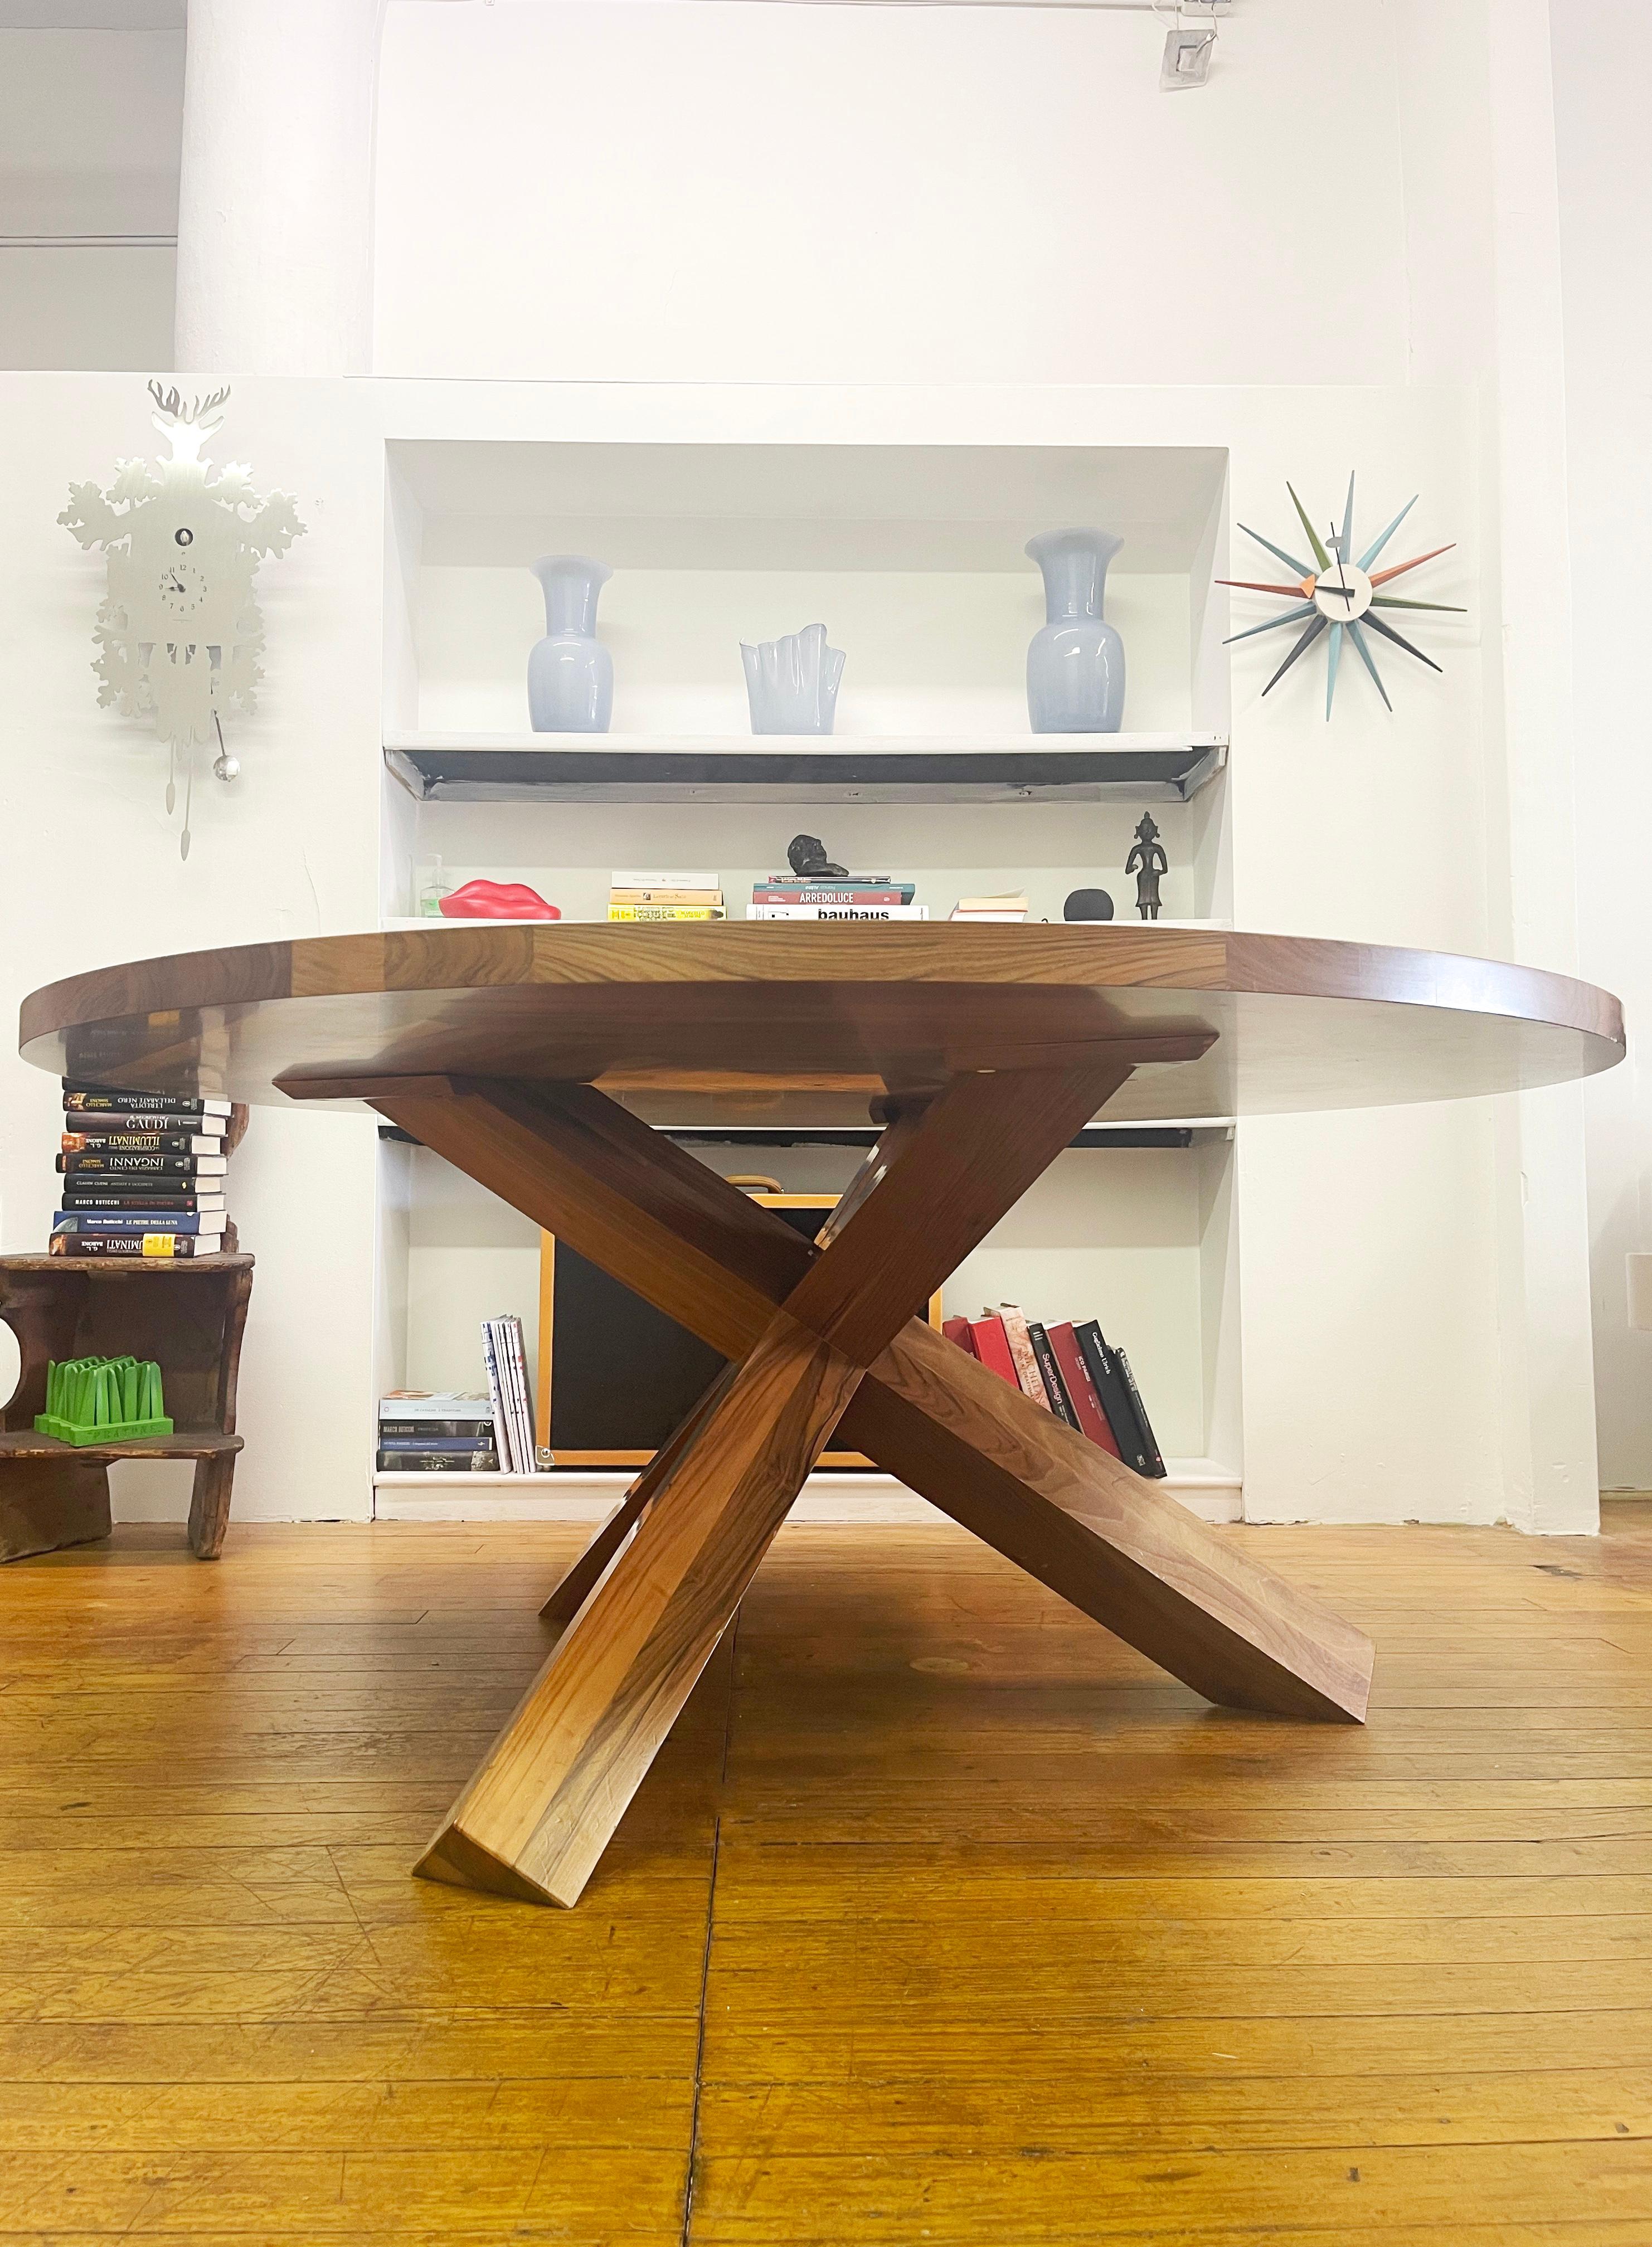 Important early edition 'La Rotonda' Dining Table designed by Mario Bellini in 1977 and manufactured by Cassina now available. This Italian masterpiece is an early edition 1978-1980. Meticulously crafted by Cassina, this iconic piece bears the